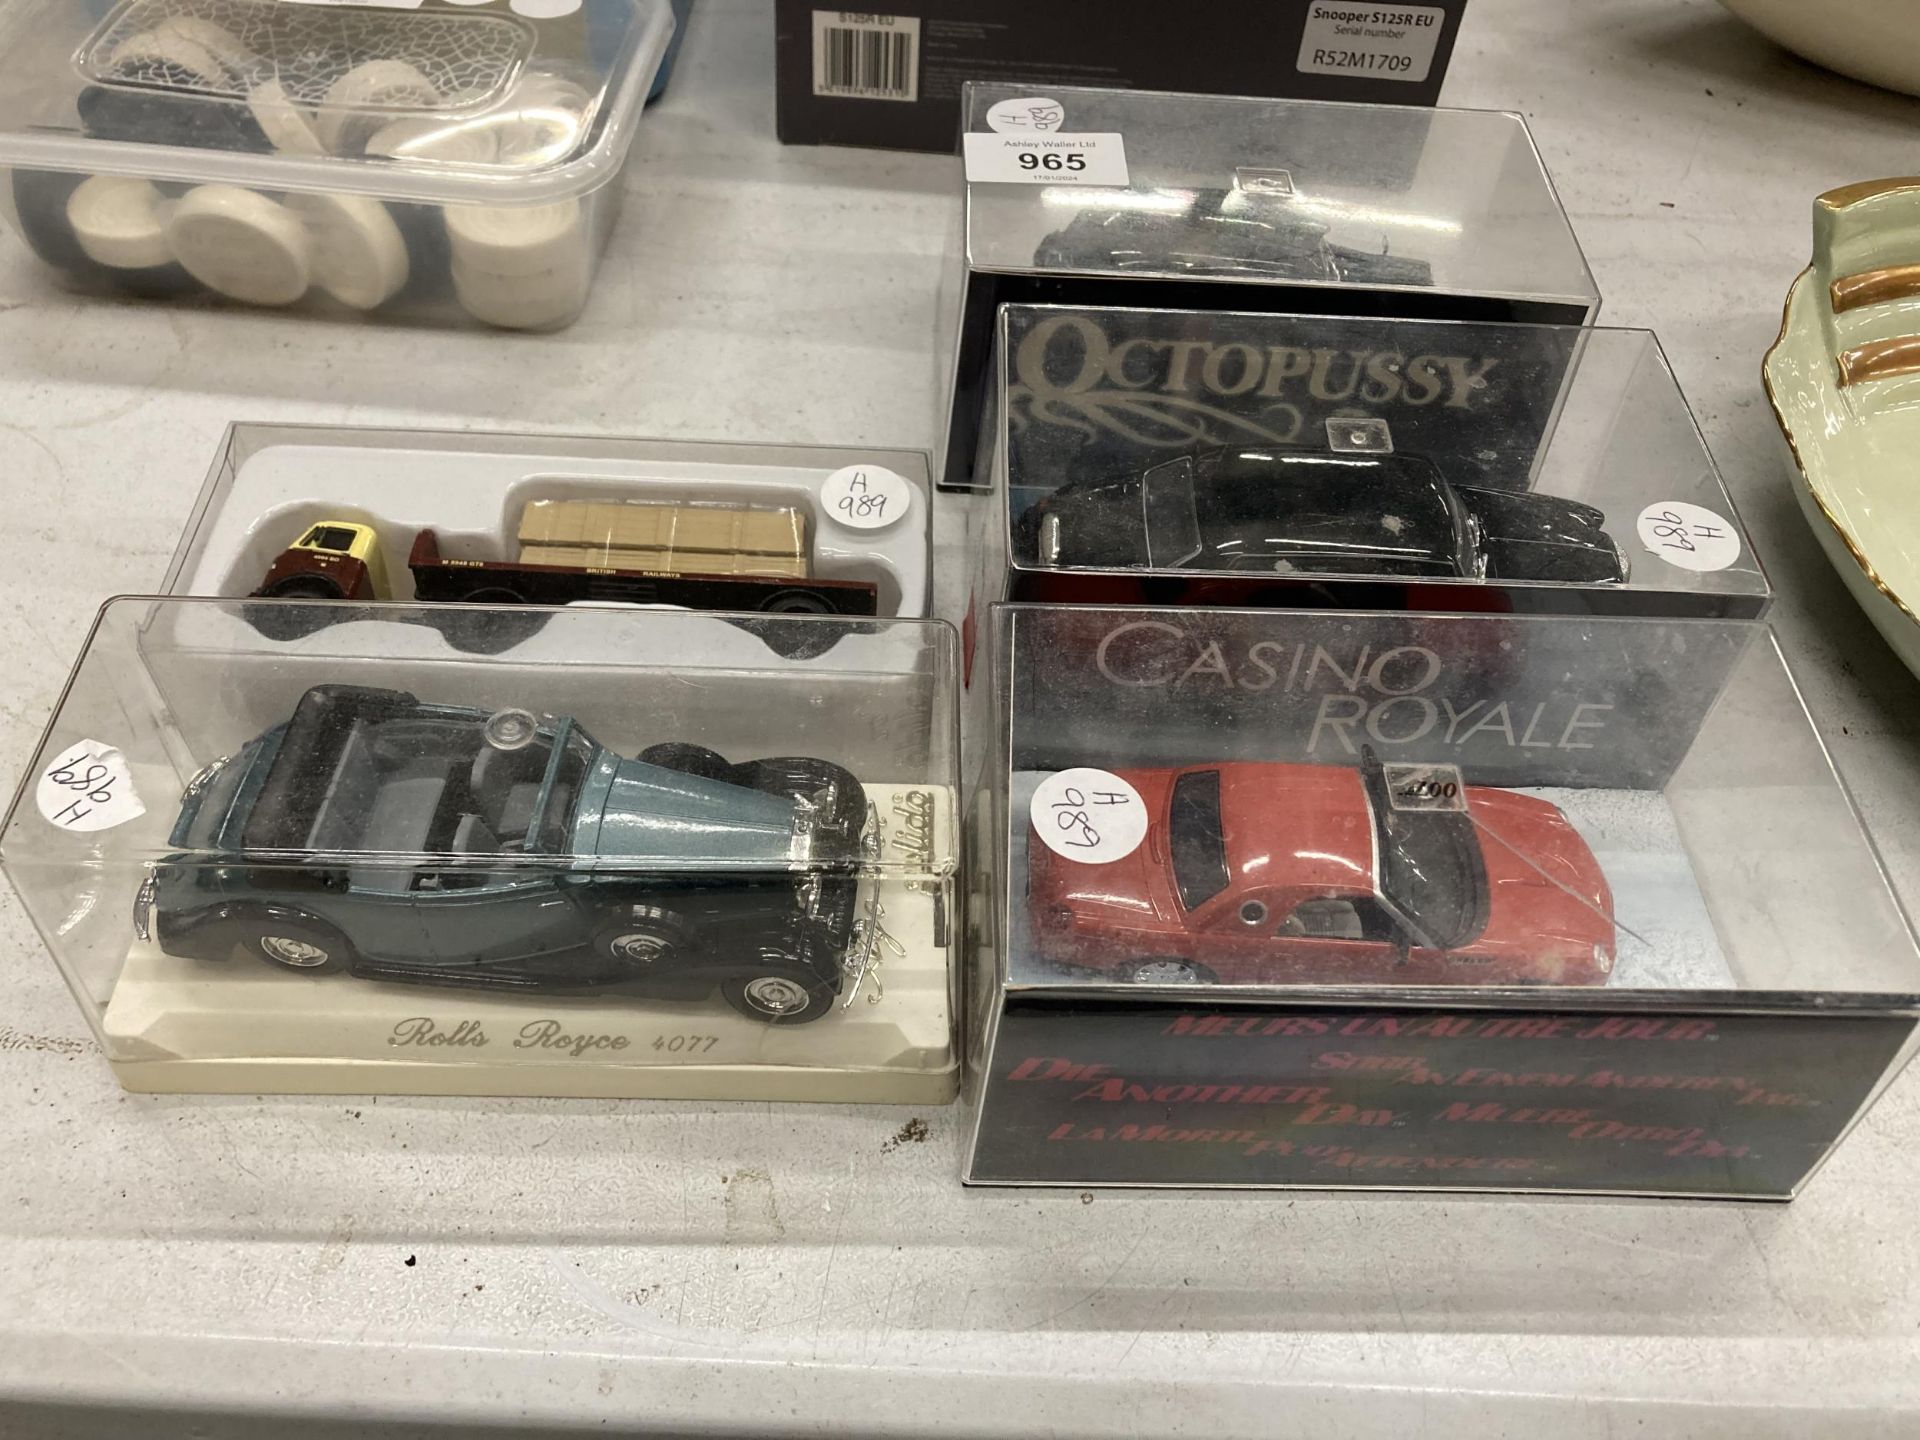 FIVE BOXED CARS TO INCLUDE CASINO ROYALE, OCTOPUSSY, ROLLS ROYCE ETC